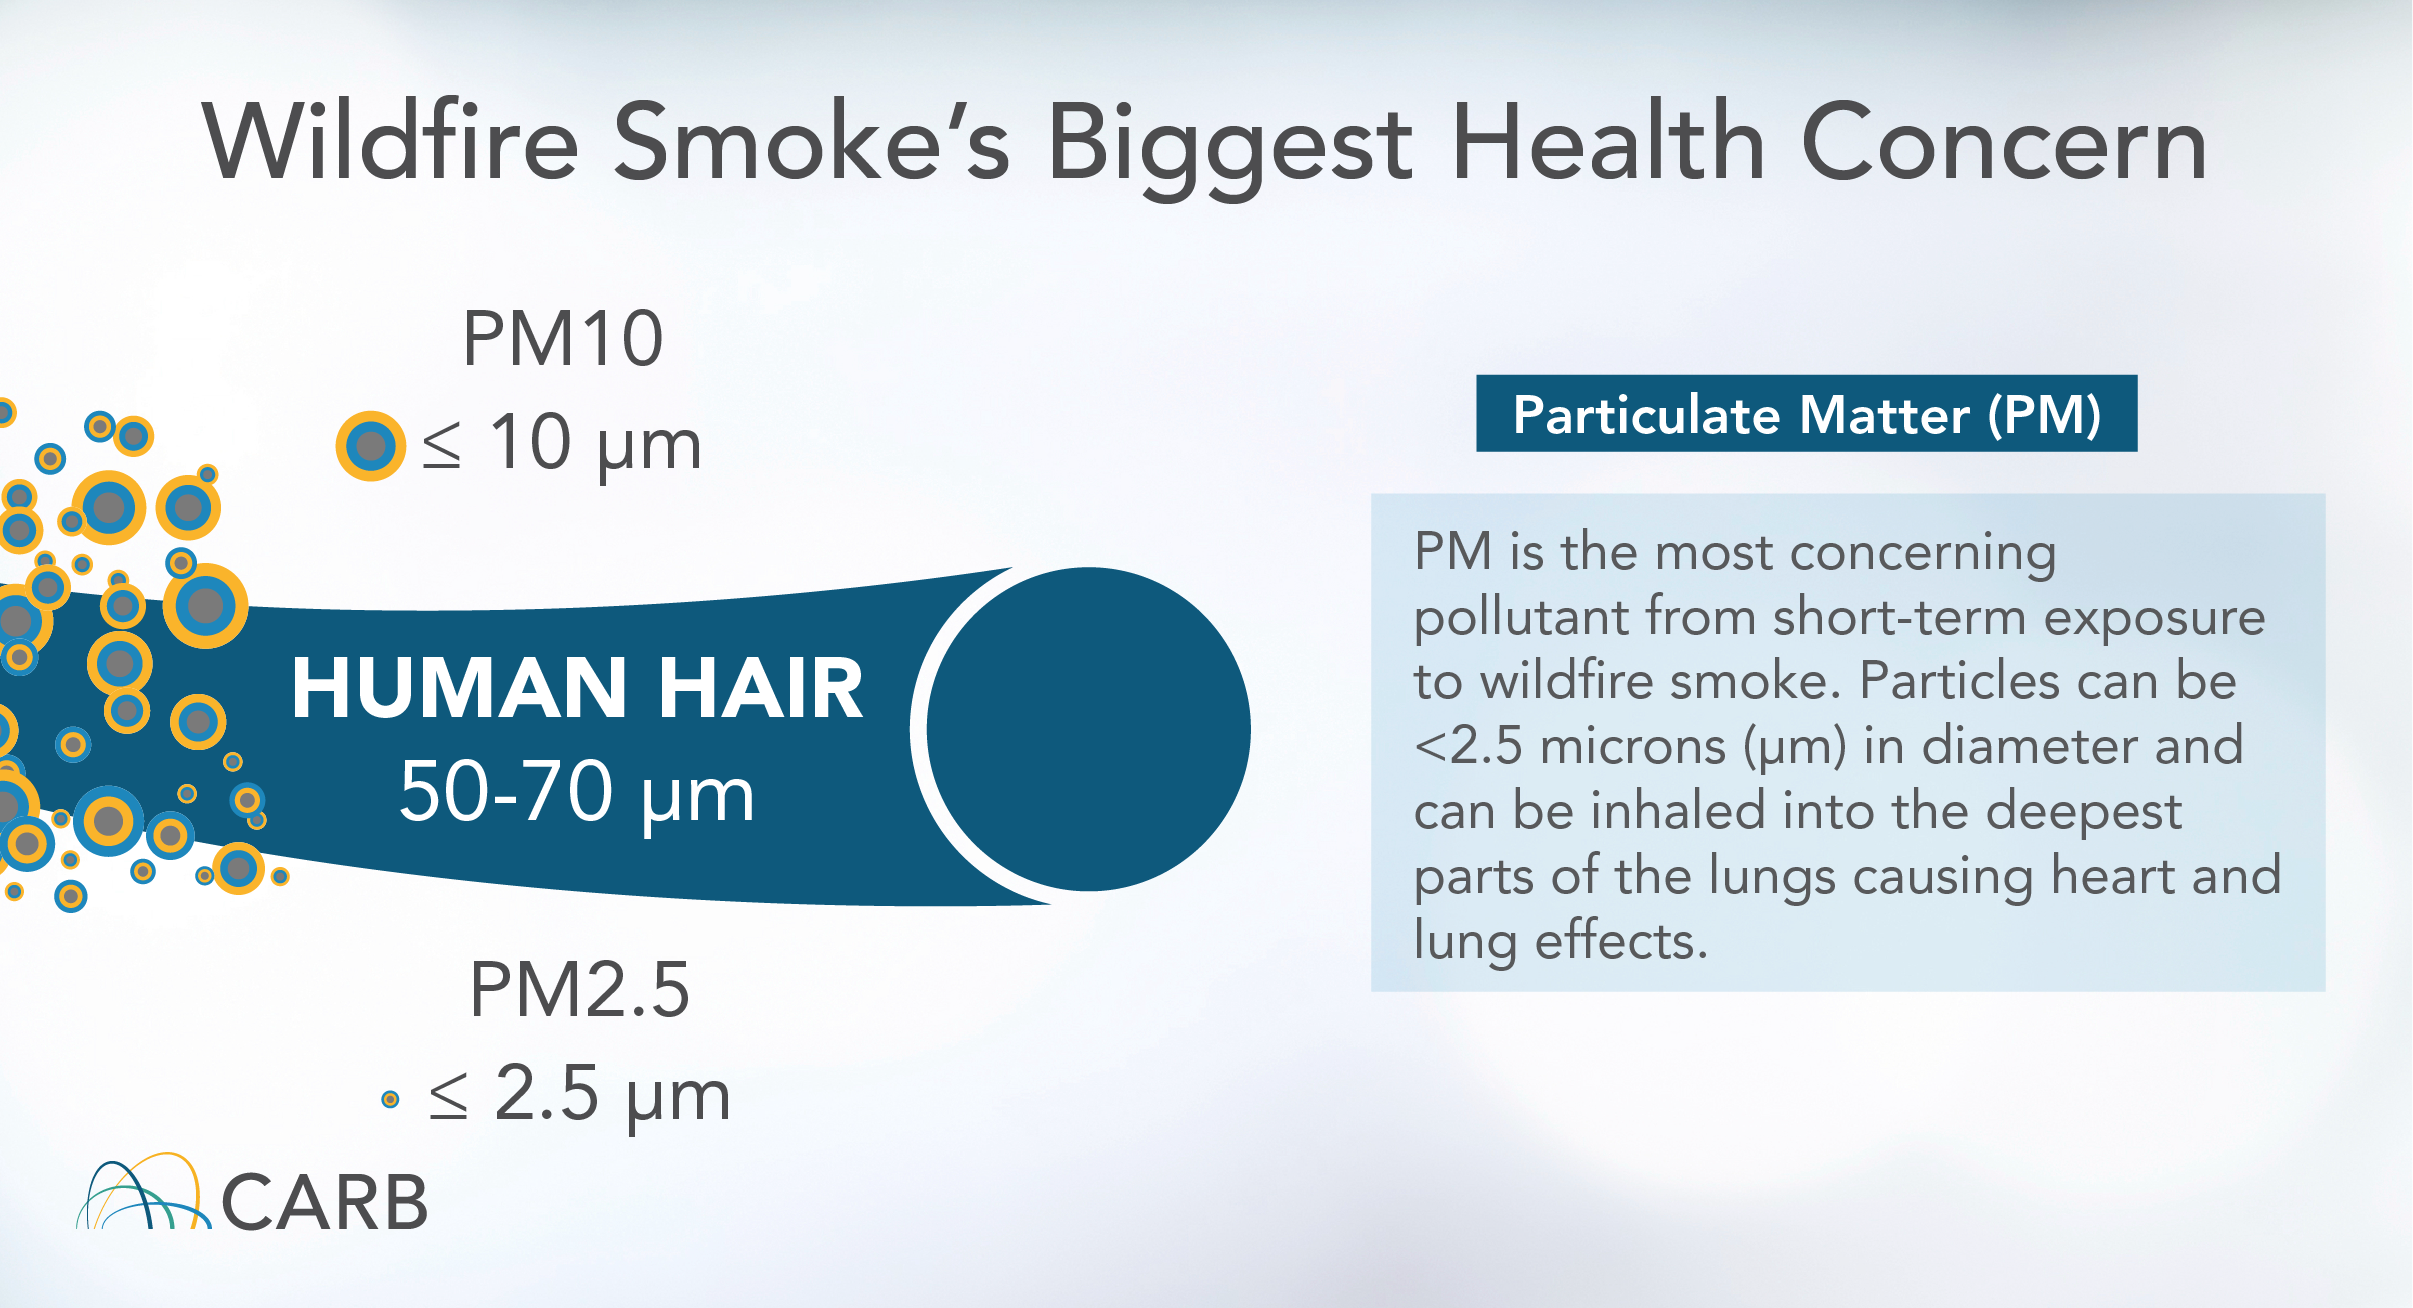 Wildfire Smoke’s Biggest Health Concern Particulate matter is the main pollutant of concern from wildfire smoke for short-term exposures (hours to weeks) typically experienced by the public. Particles from smoke are very small (2.5 microns or less in diameter) and can be inhaled into the deepest parts of the lungs. The association between PM2.5 and heart and lung health effects is well documented in scientific literature.  PM2.5: ≤ 2.5 μm PM10: ≤ 10 μm Human Hair: 50-70 μm